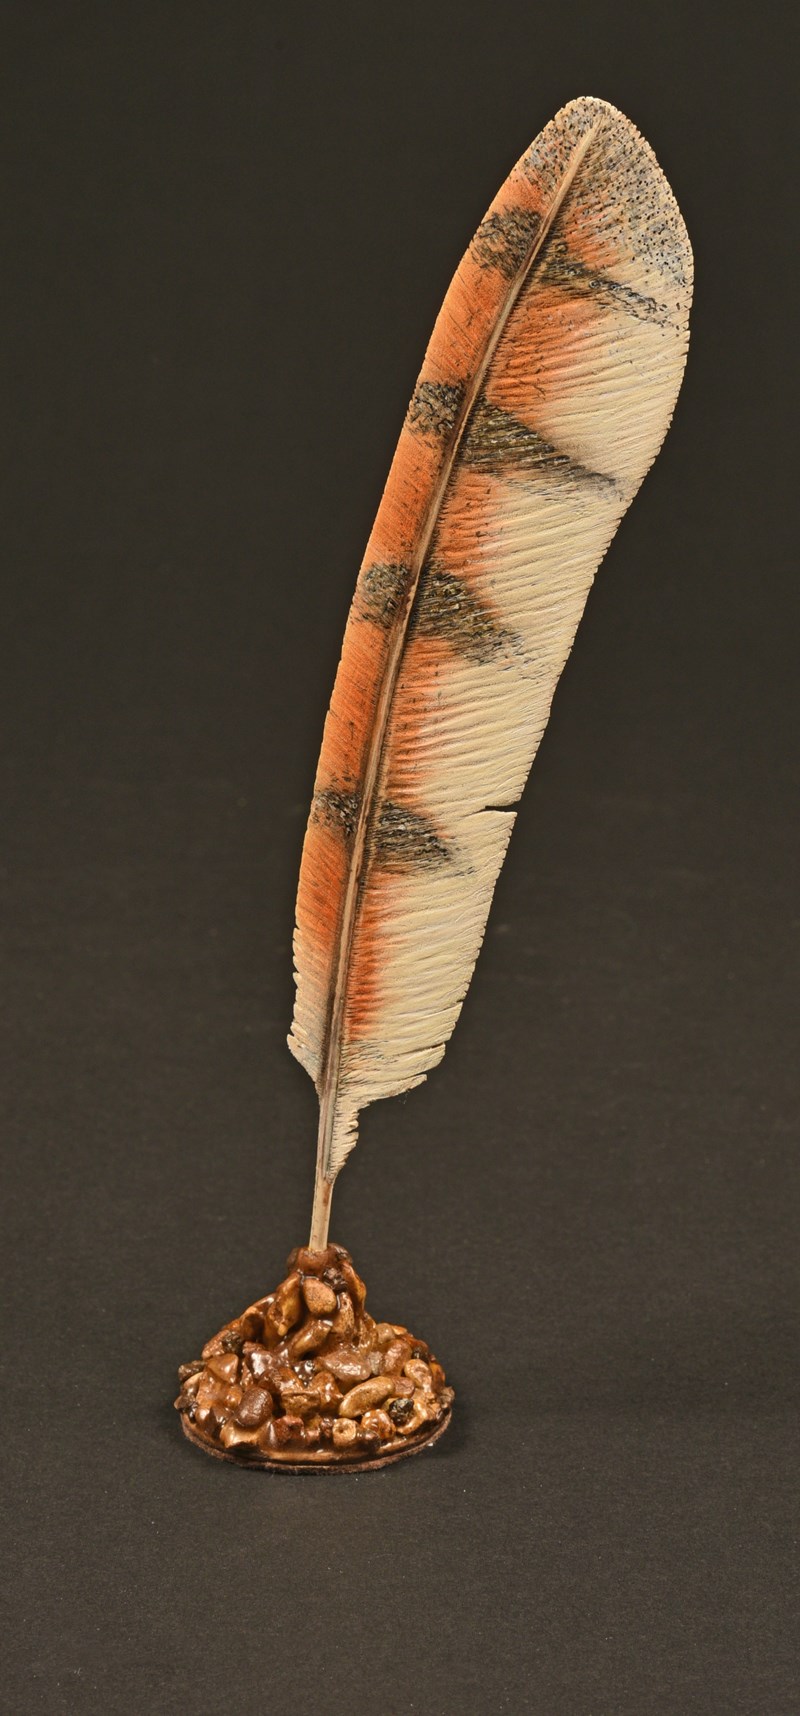 Barn Owl Feather by Stephen Rose, HC